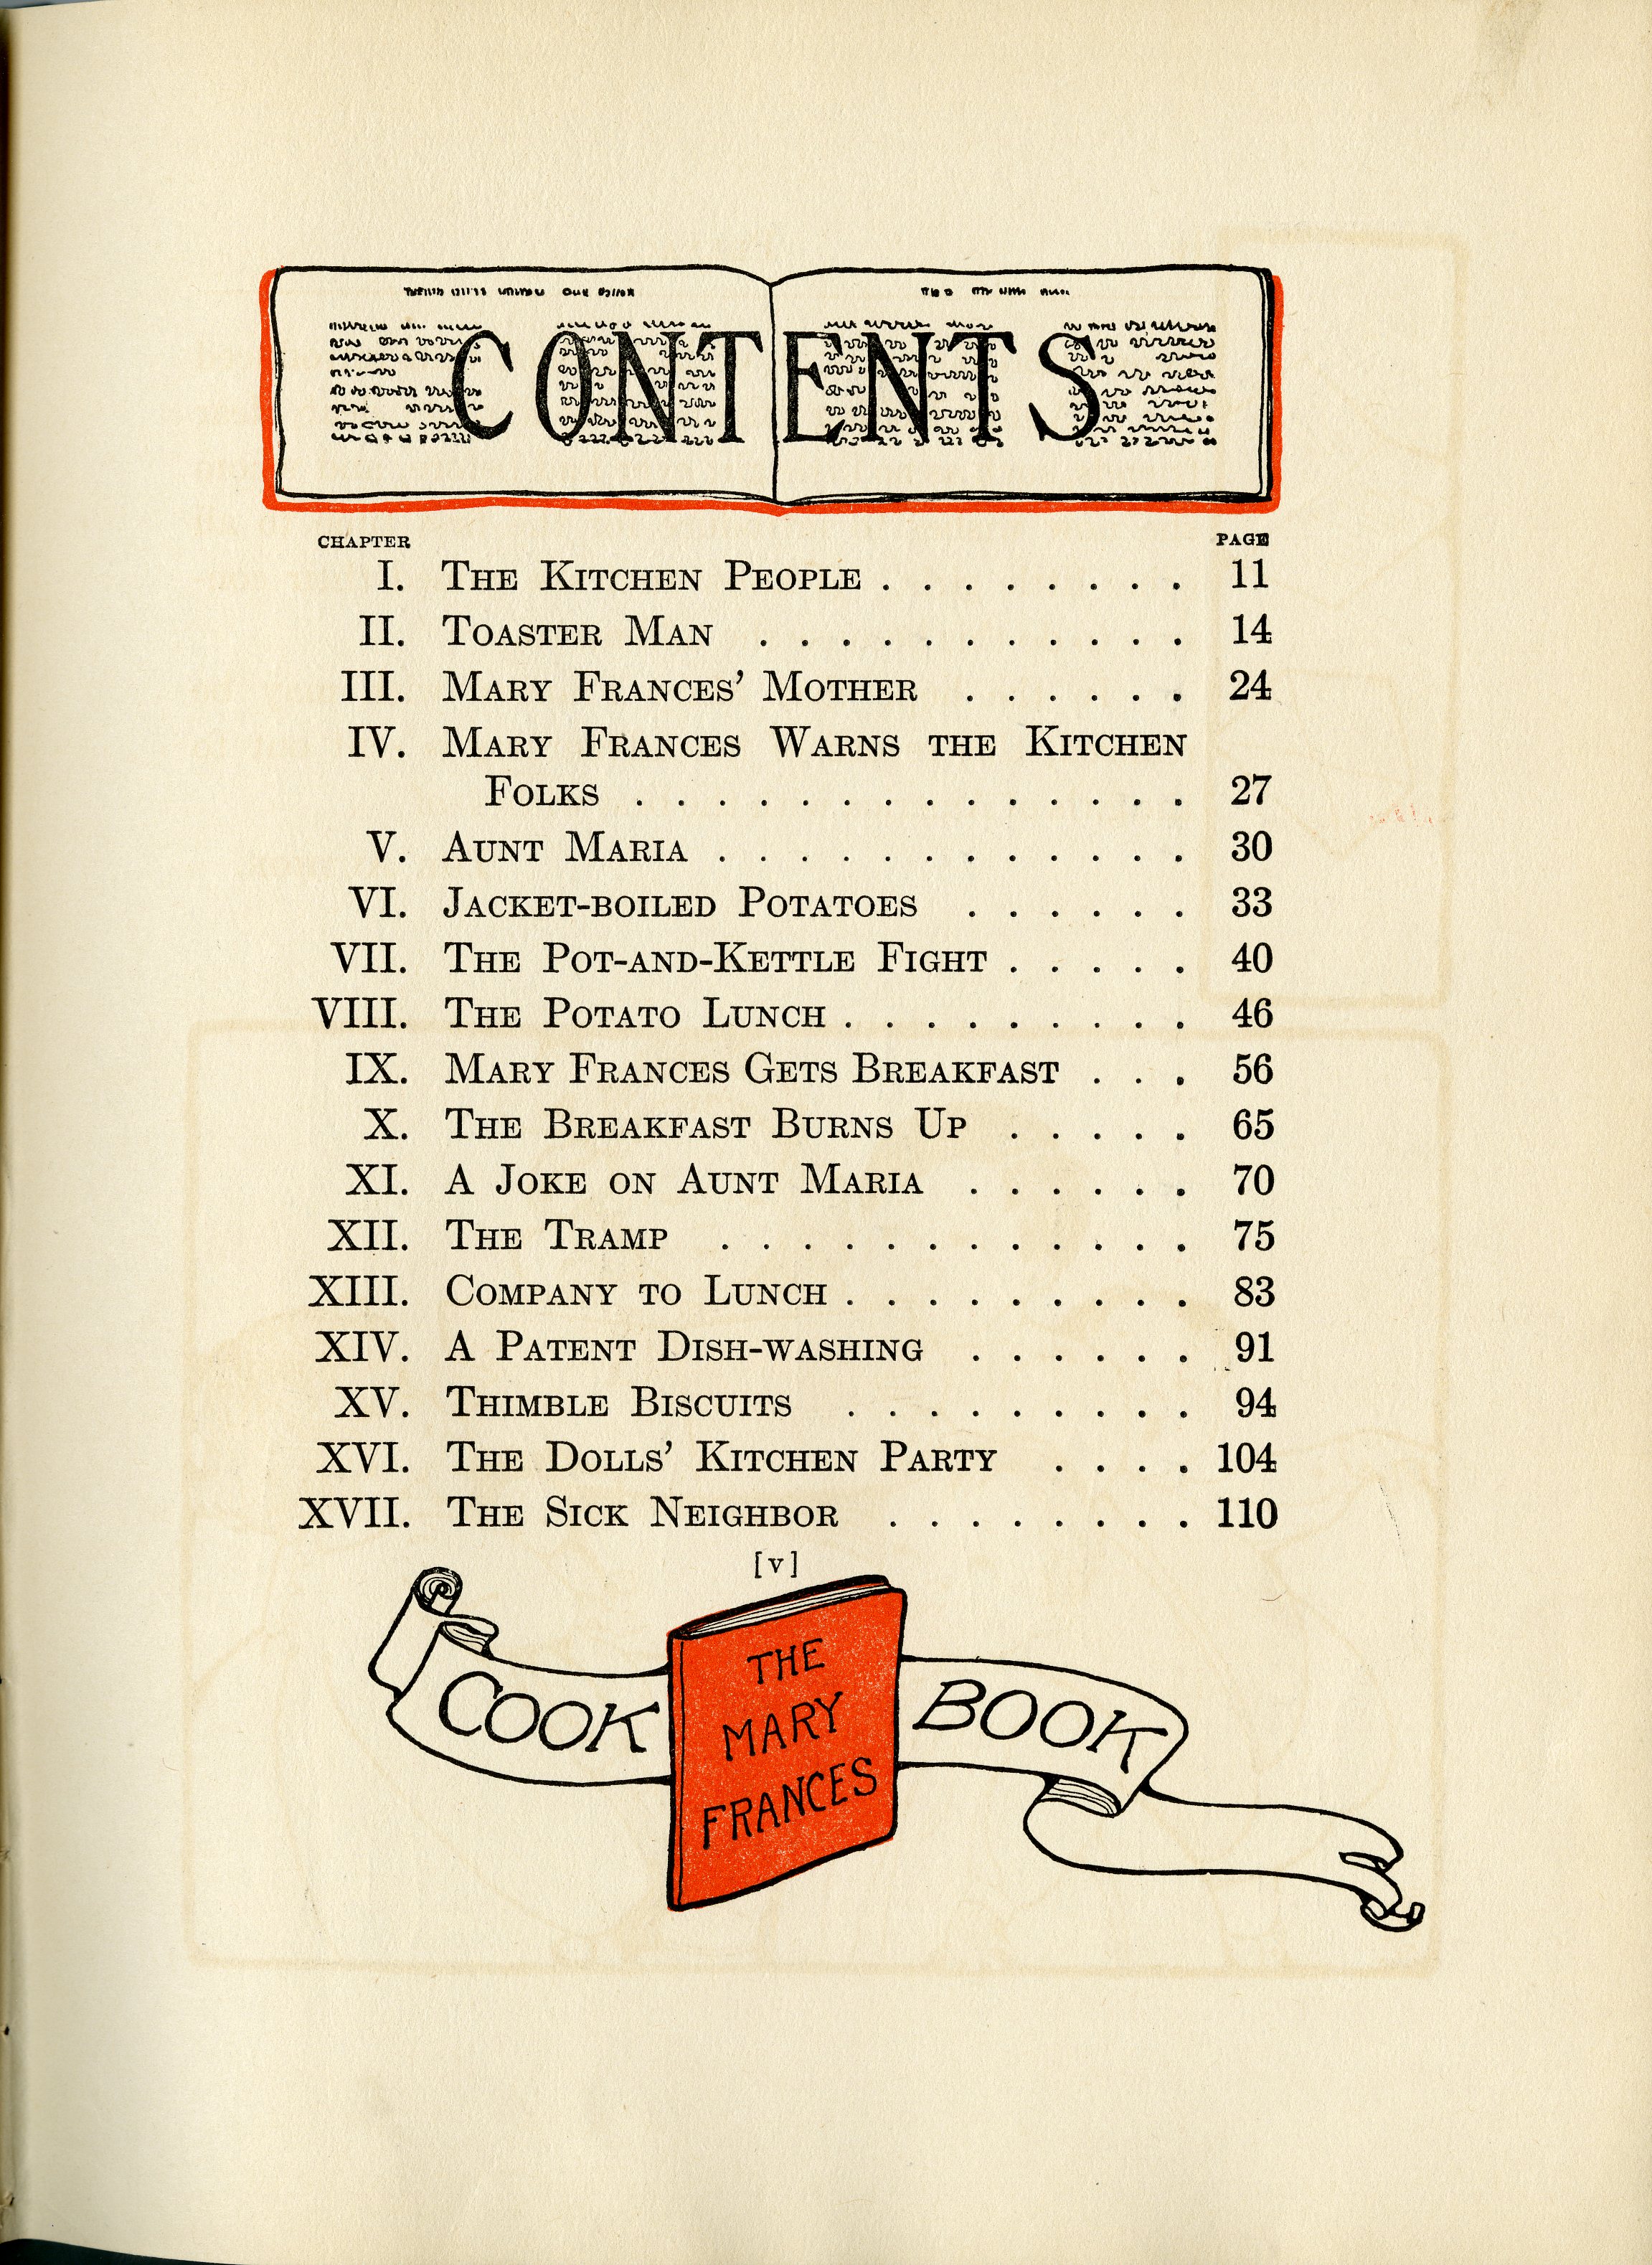 children’s cookbooks – What's Cookin' @ Special Collections?!